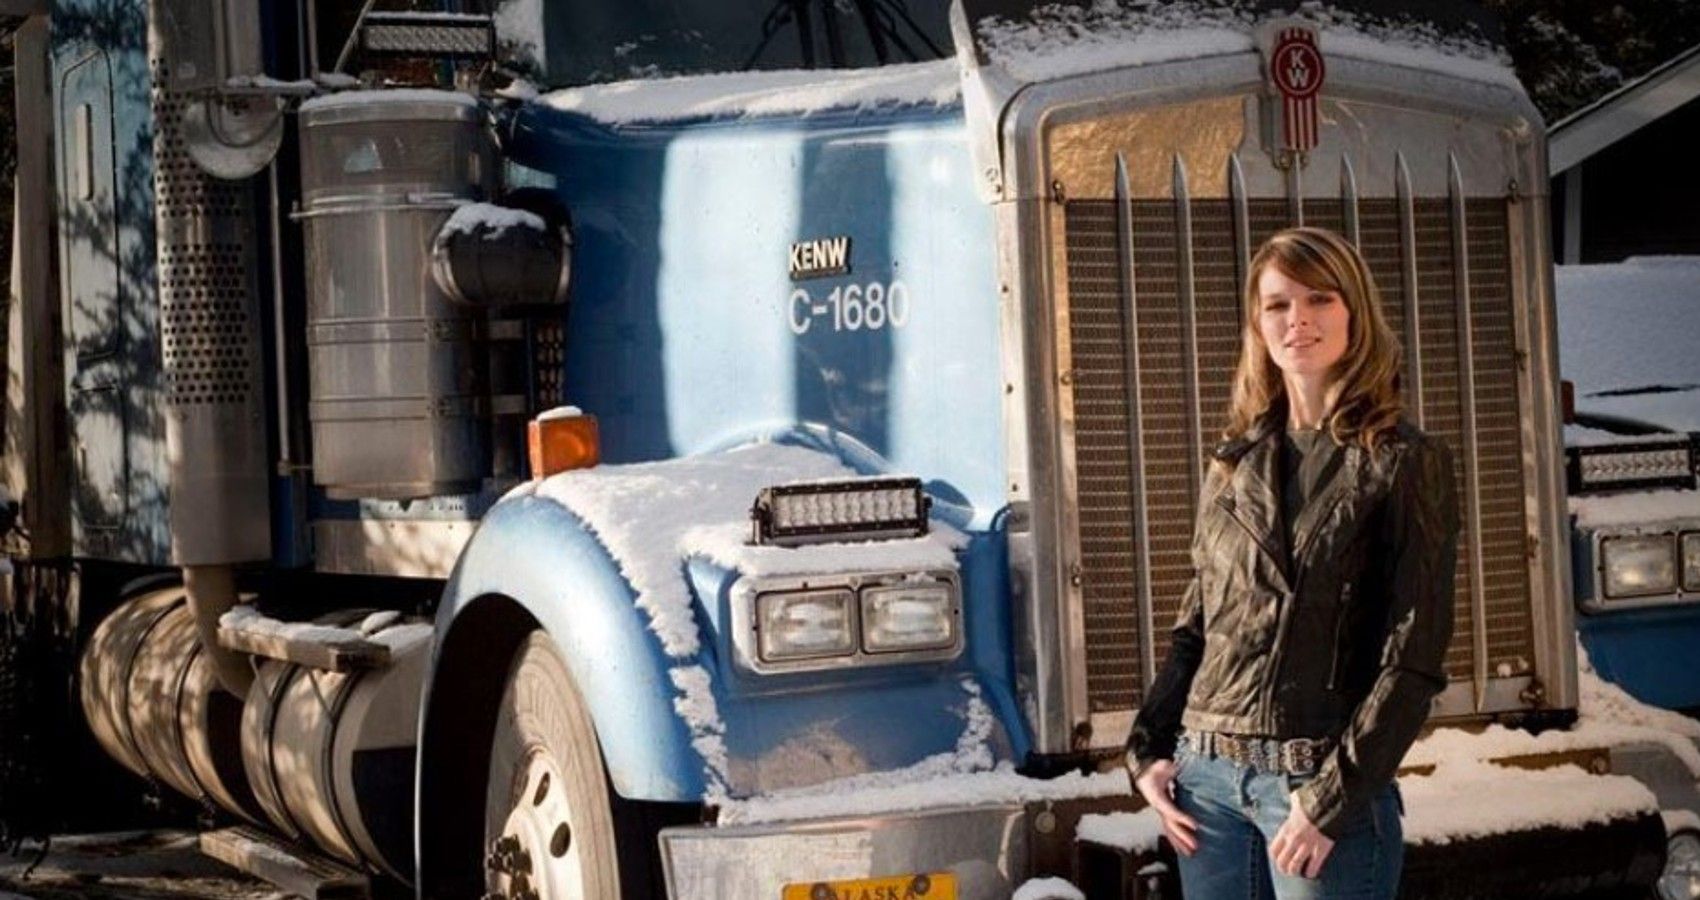 Lisa Kelly posing with her truck